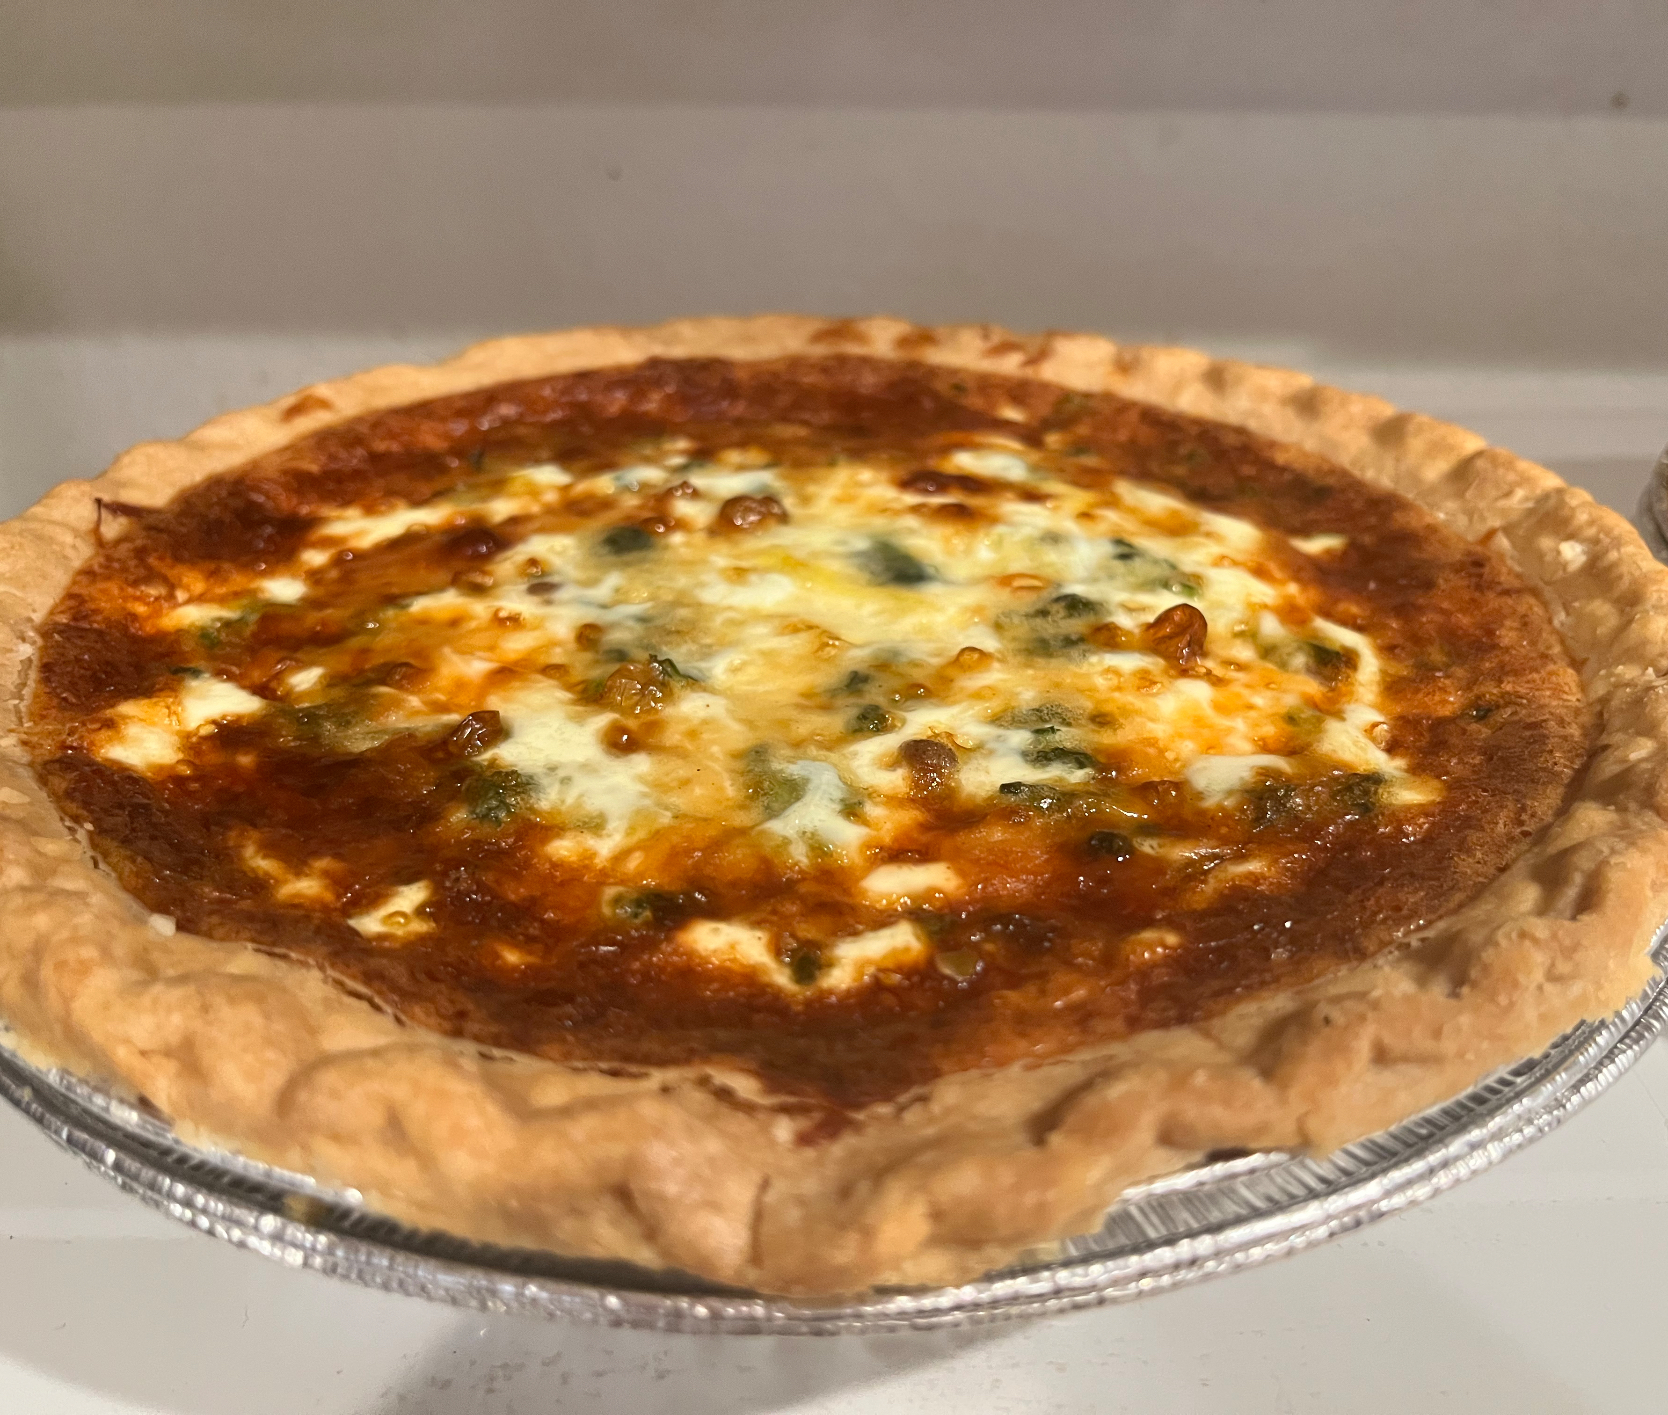 Quiche Lorraine- bacon, caramelized onions, spinach, eggs, heavy cream, and Gruyère cheese